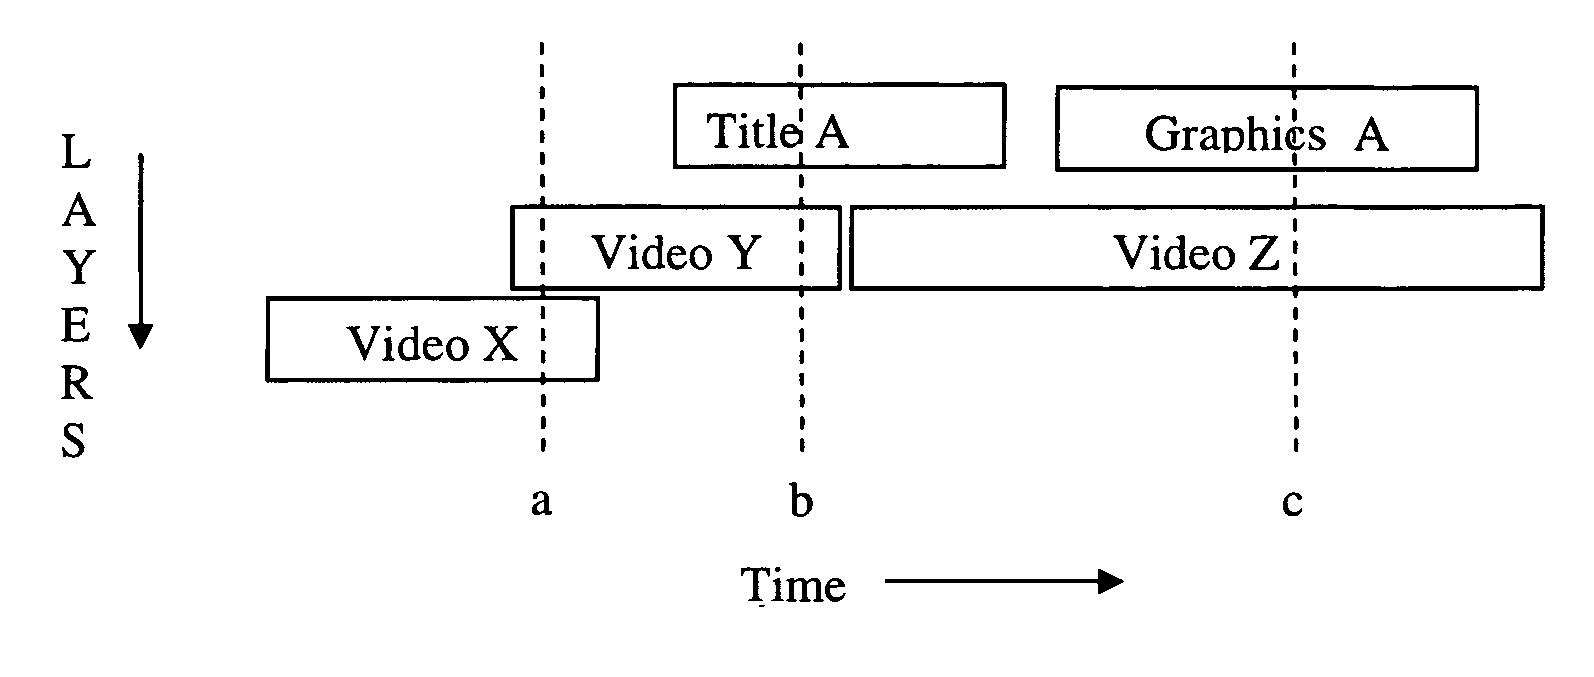 Icon bar display for video editing system